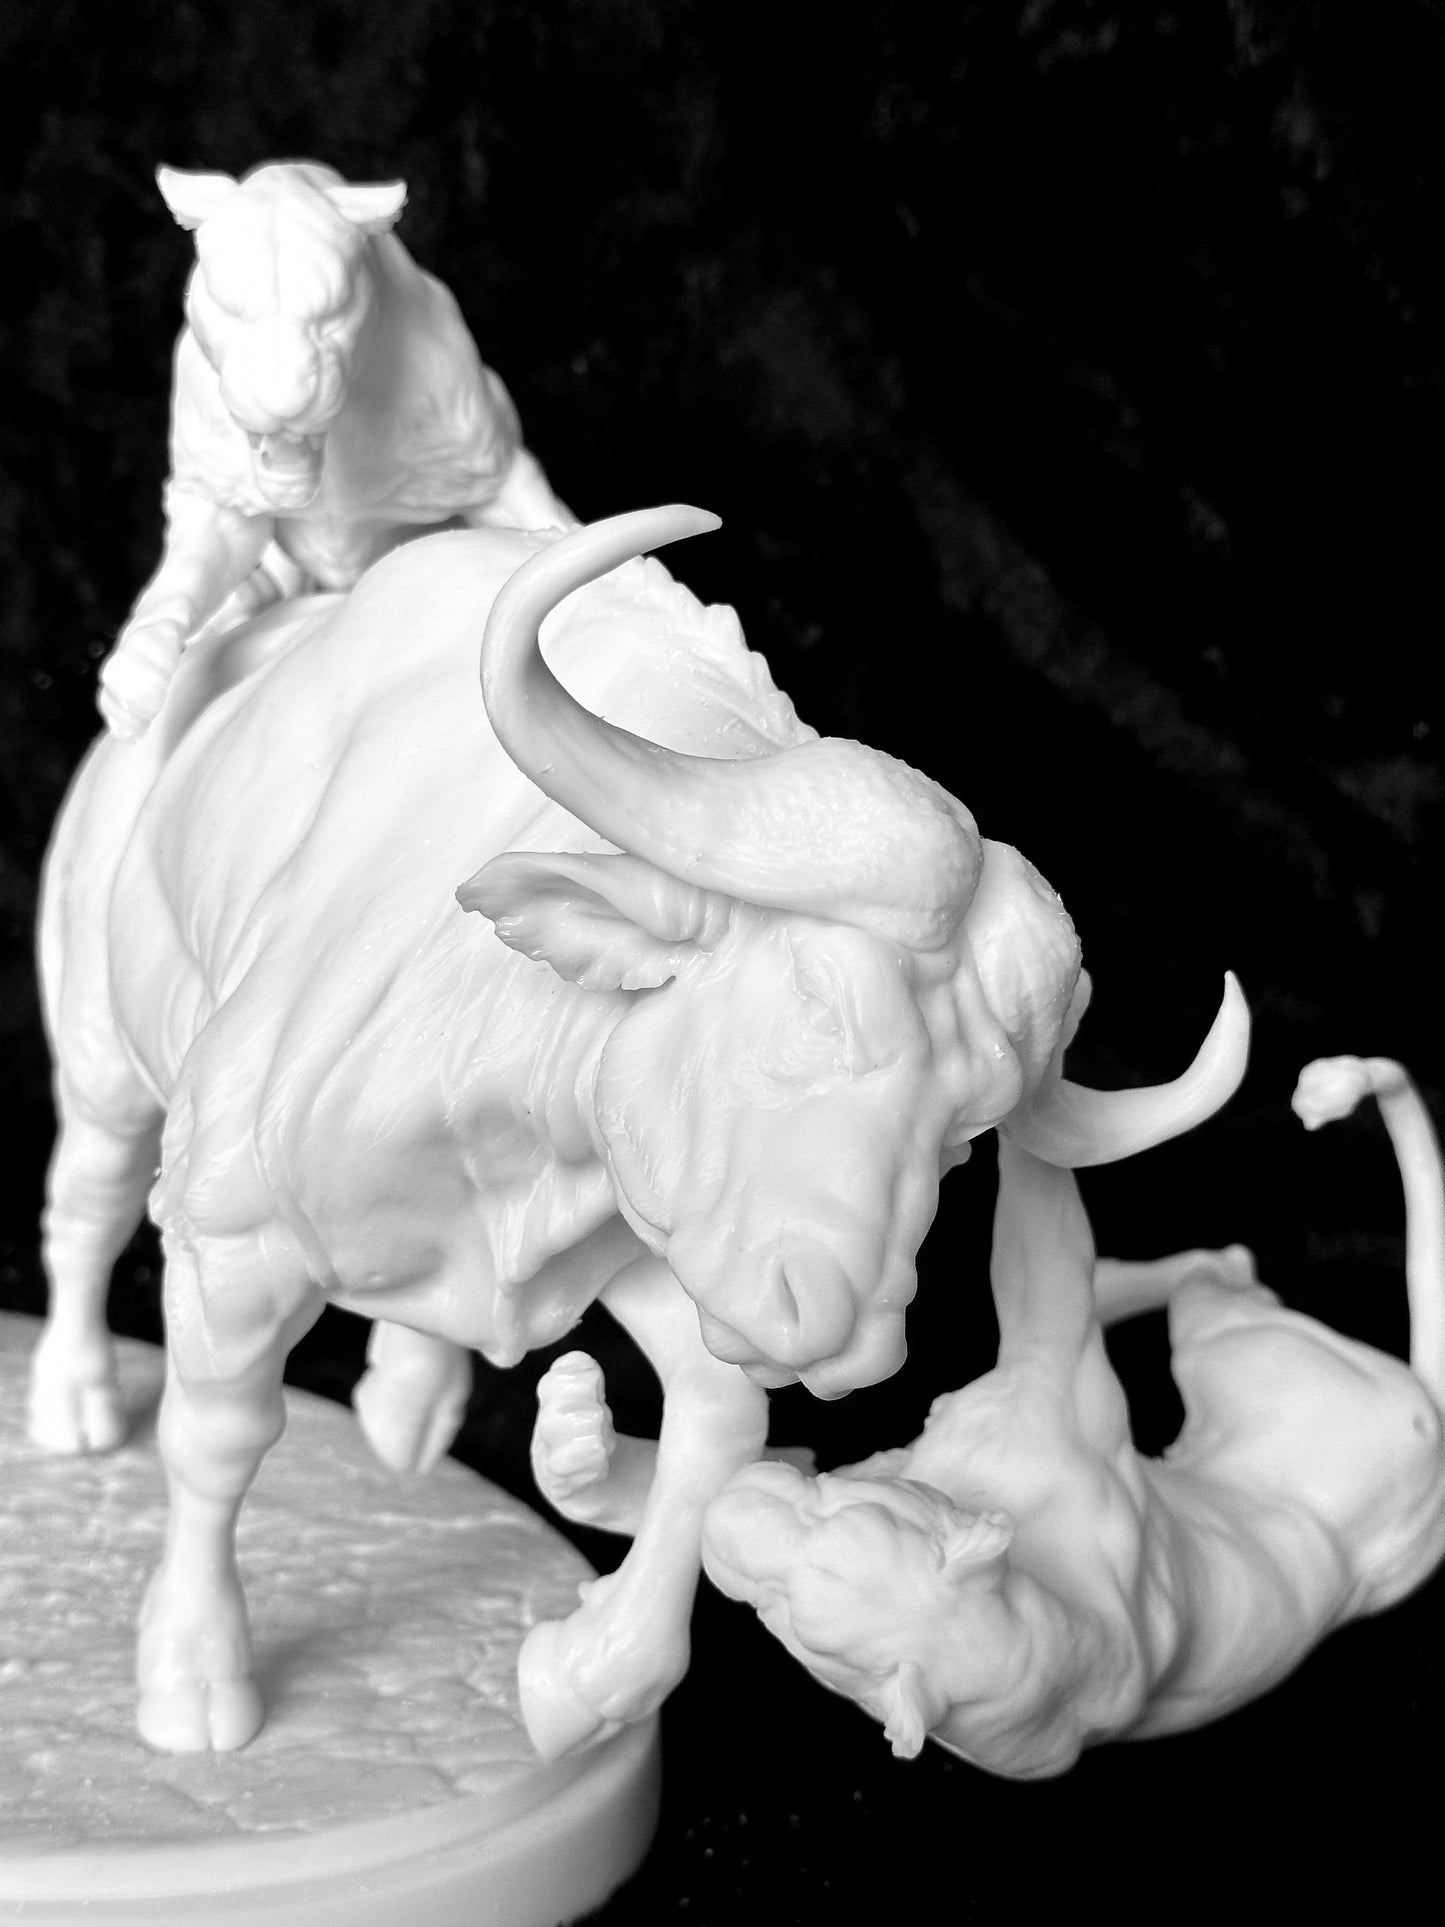 Lions hunting buffalo tradtional 1/9 scale piece ltd edition of 5